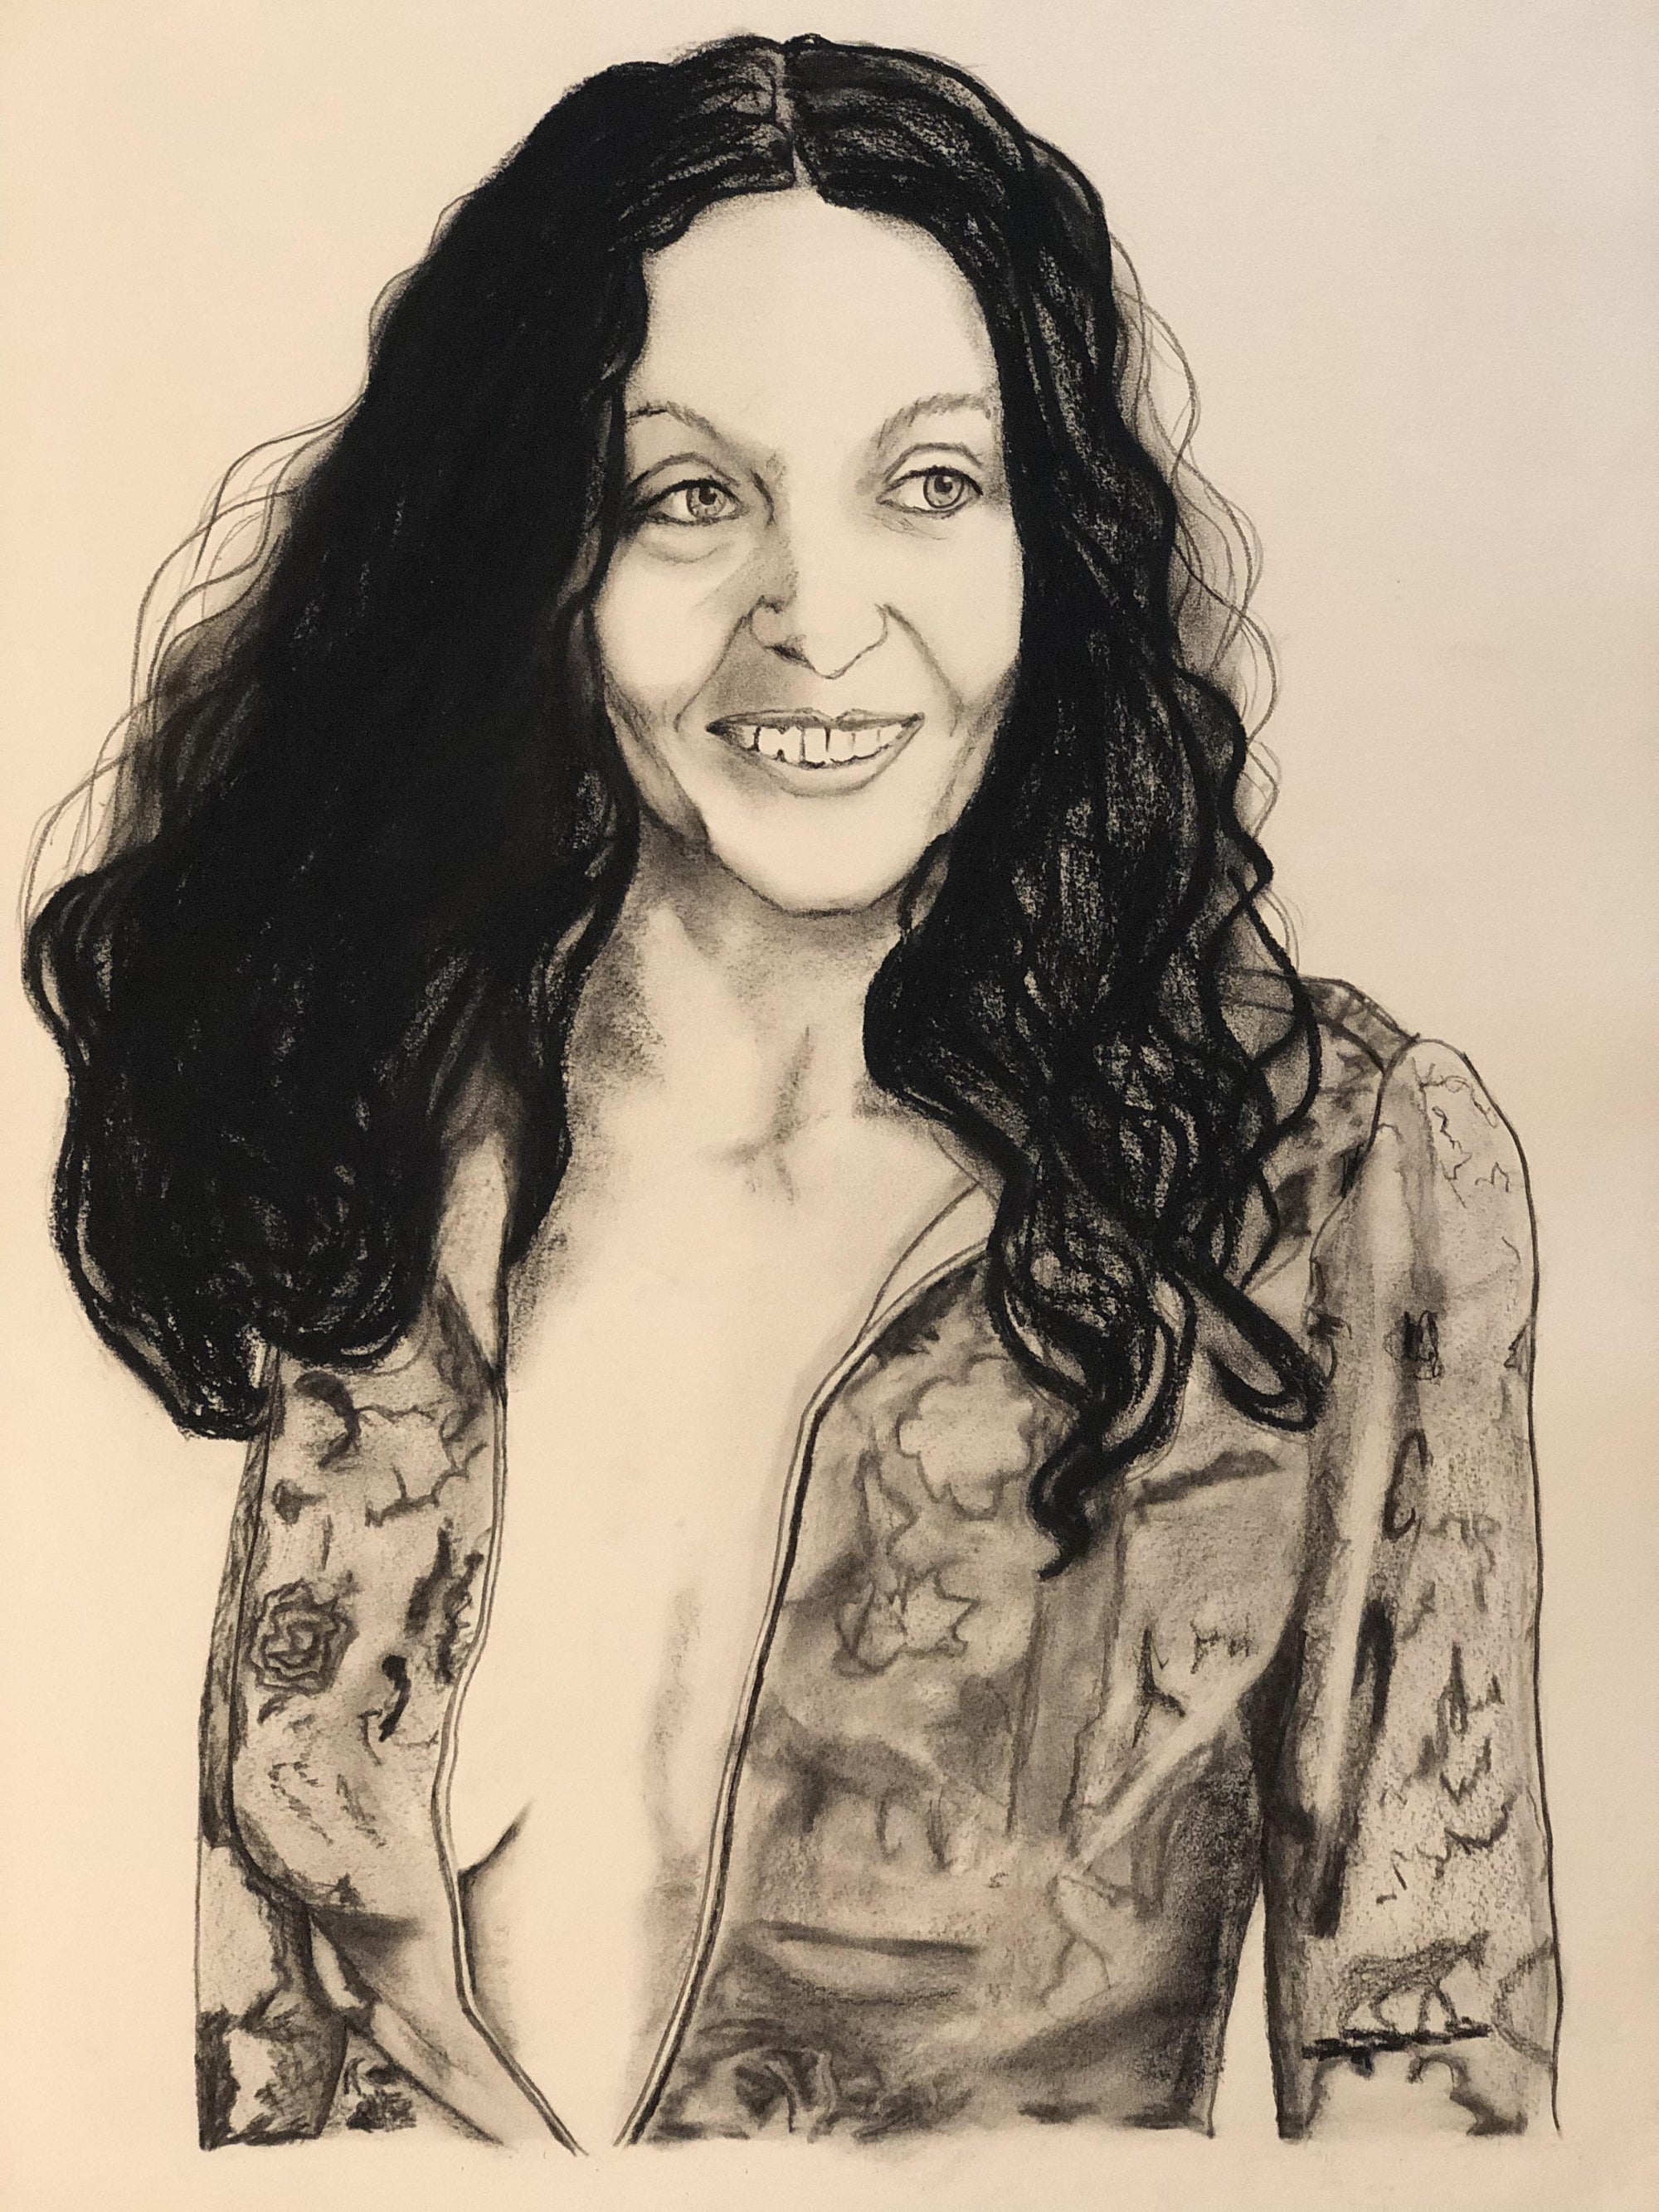 Fani 2020 - Graphite & Charcoal on Arches -  600 x 840mm - SOLD